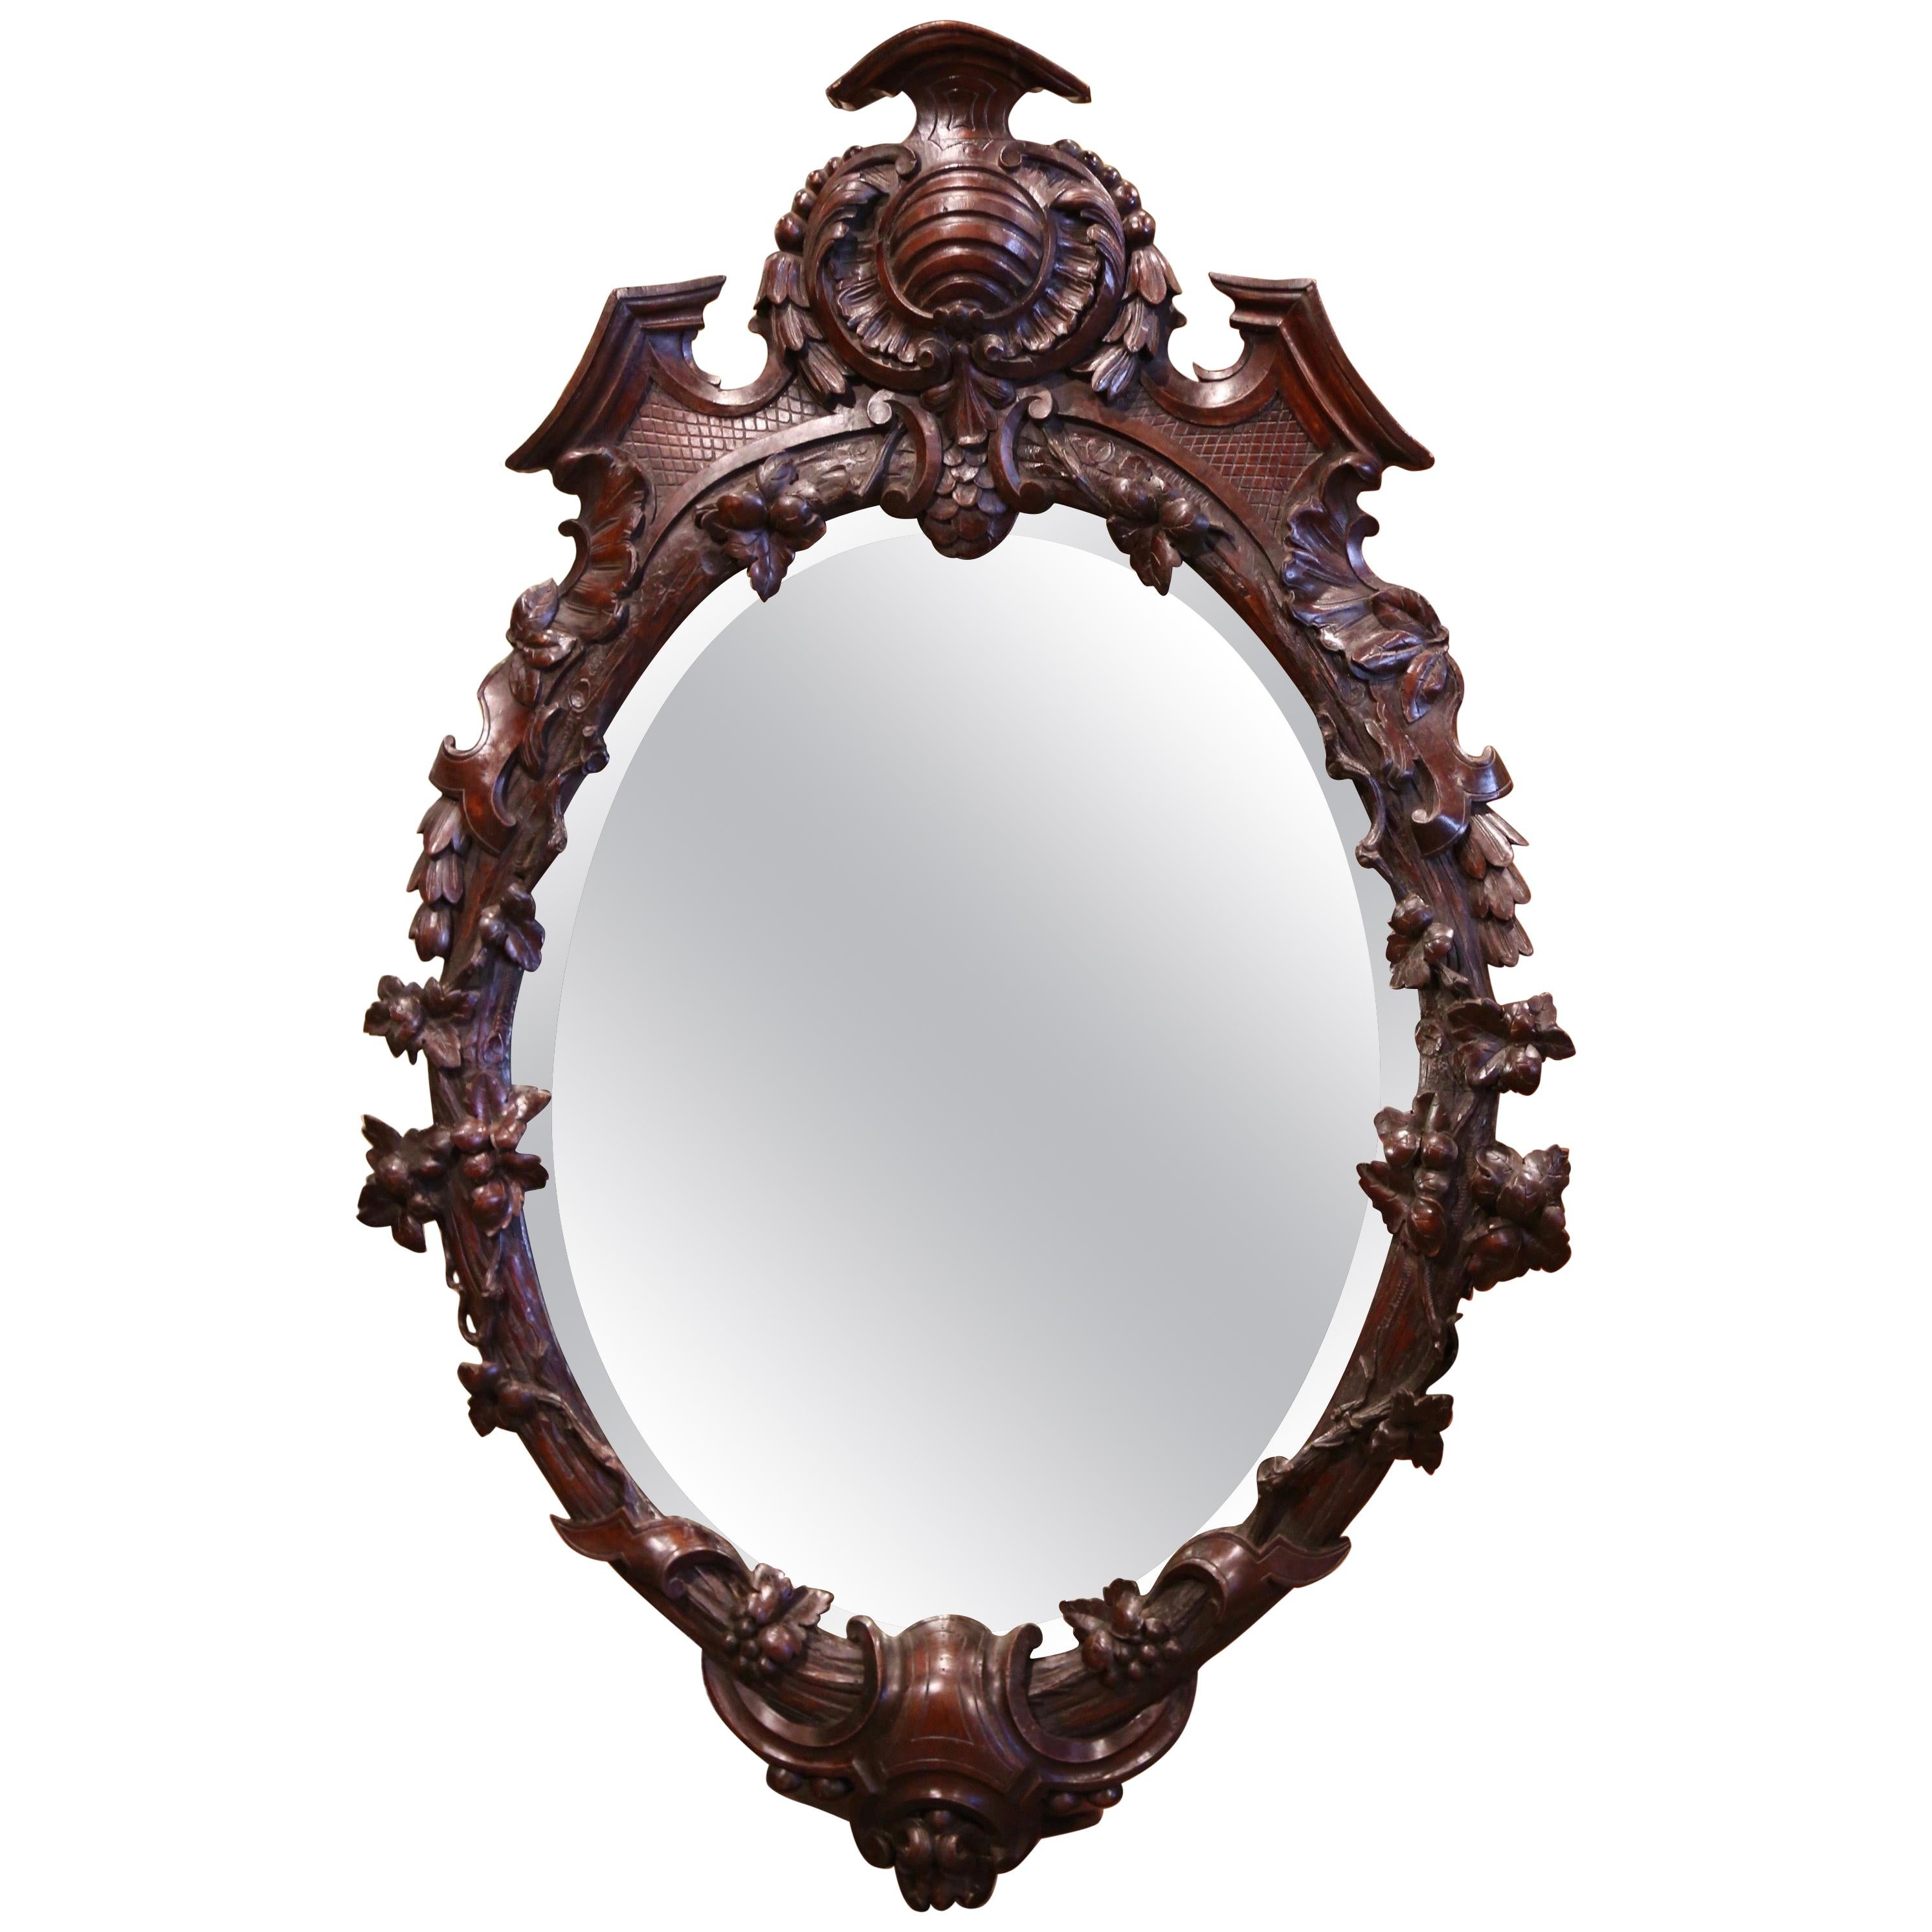 19th Century French Black Forest Carved Walnut and Beveled Glass Oval Mirror